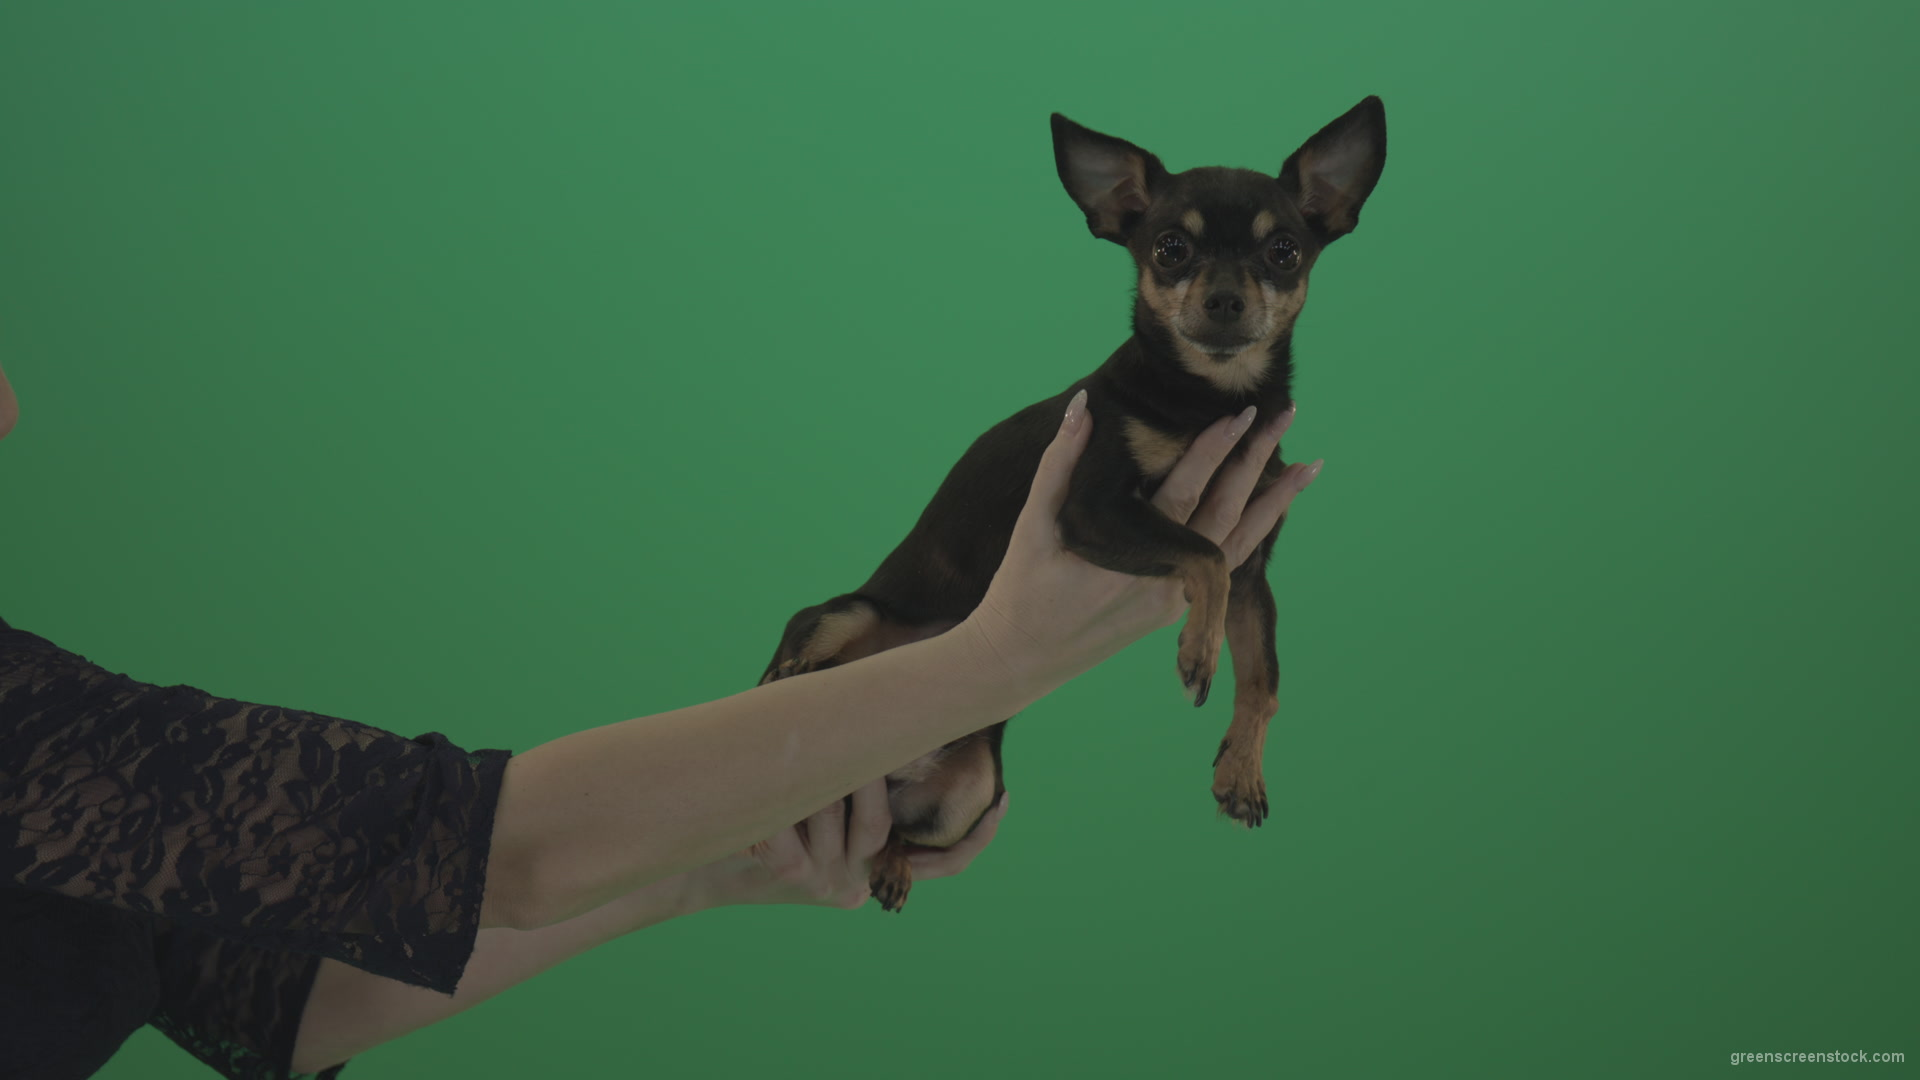 Black-funny-Chihuahua-small-dog-in-female-hands-on-green-screen_007 Green Screen Stock